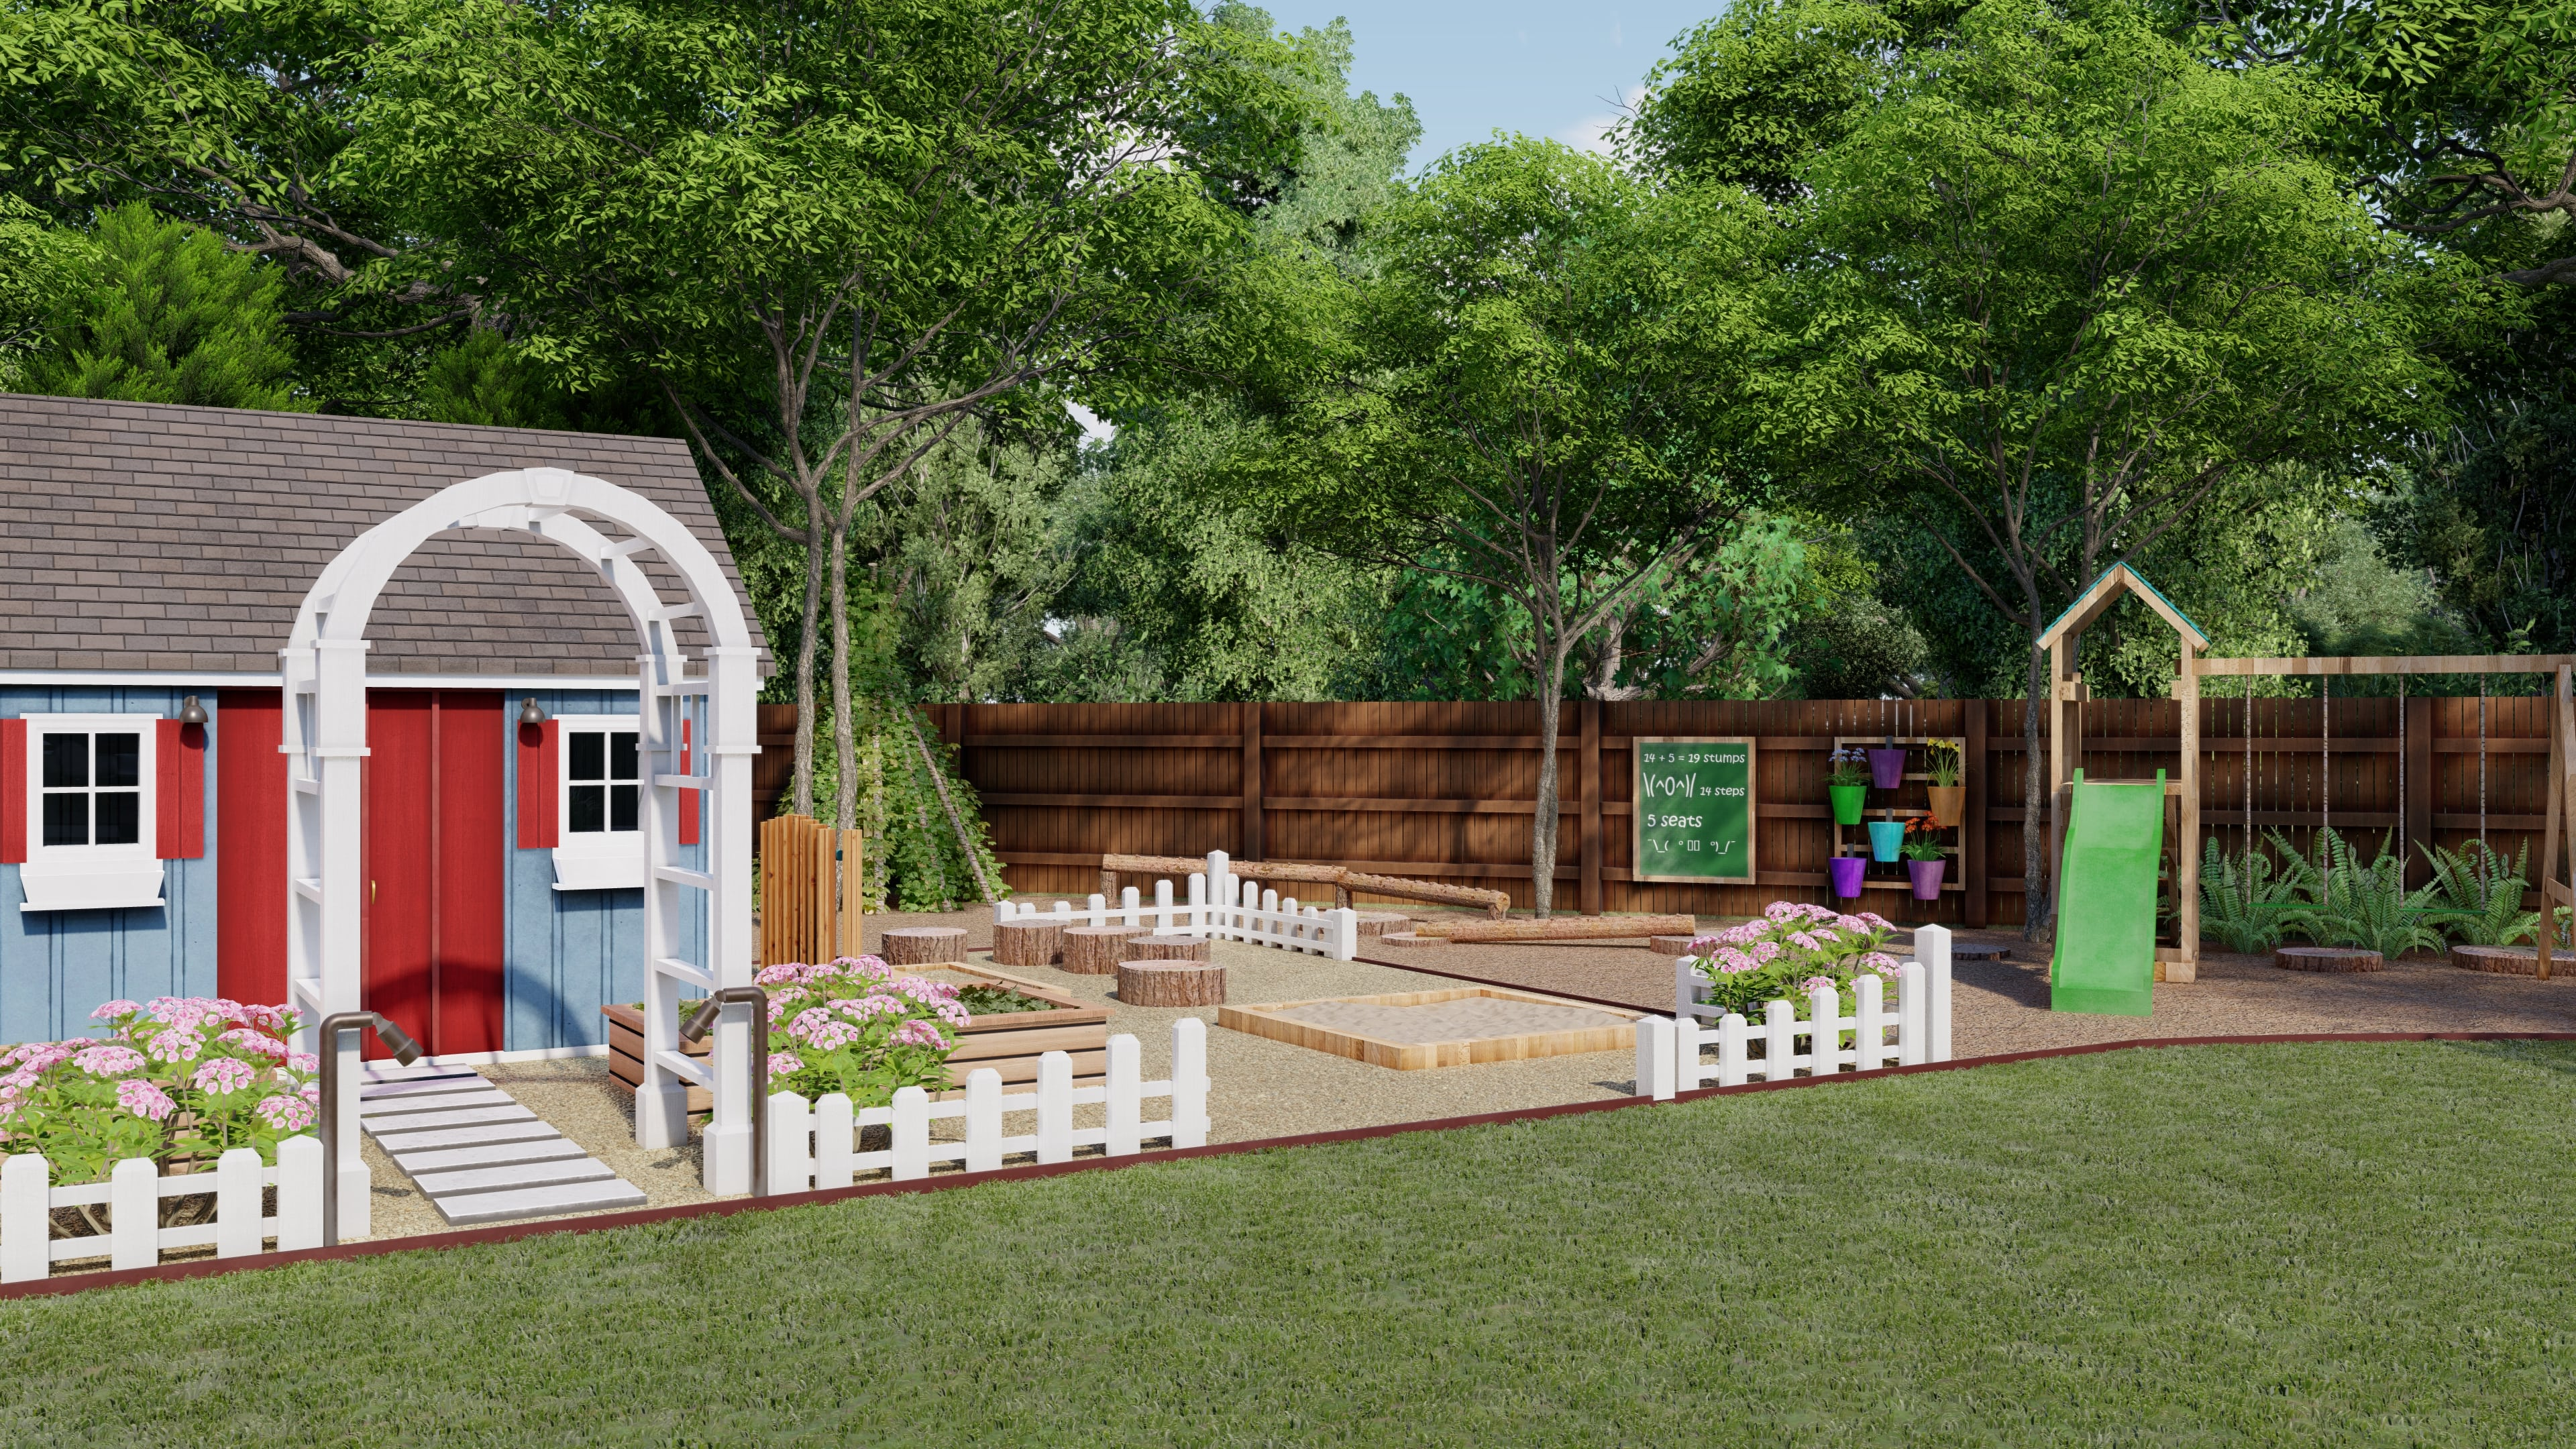 a kid playarea with lots of natural play items, a tree swing, slide, chalkboard, house with window box